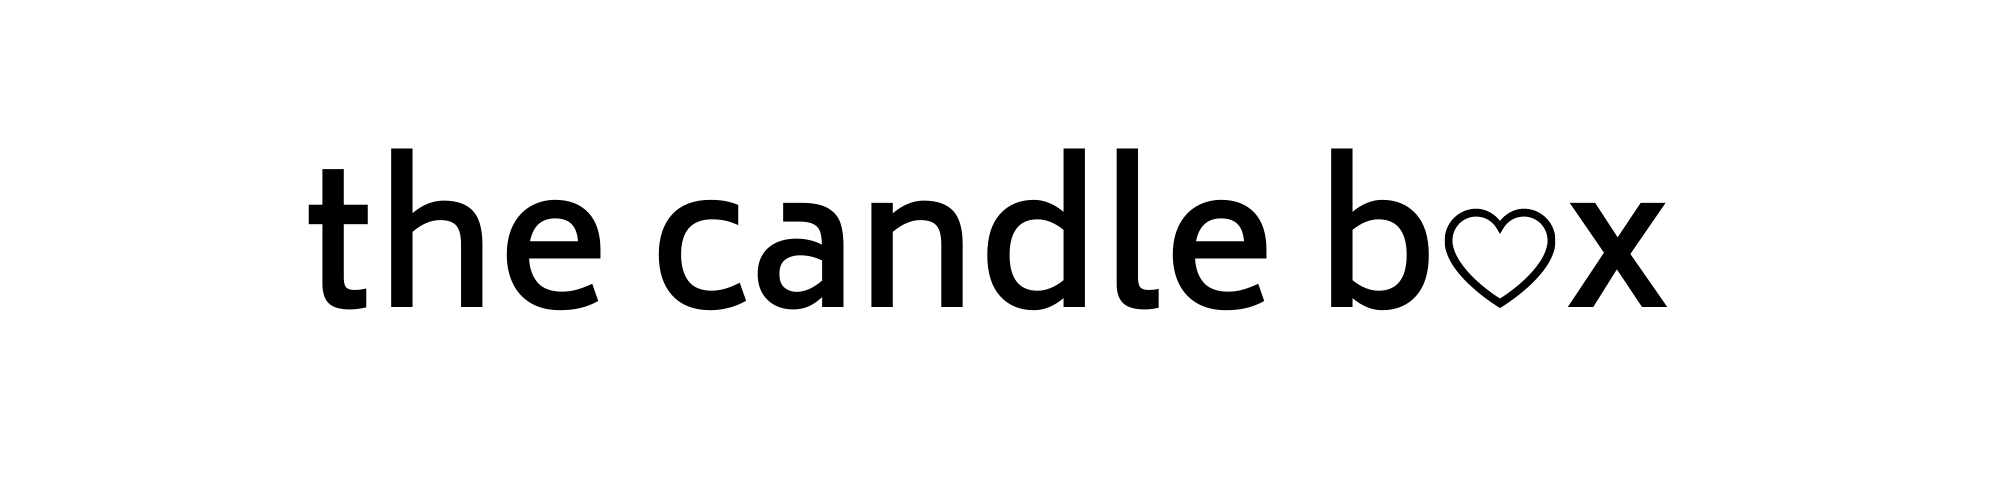 The Candle Box logo